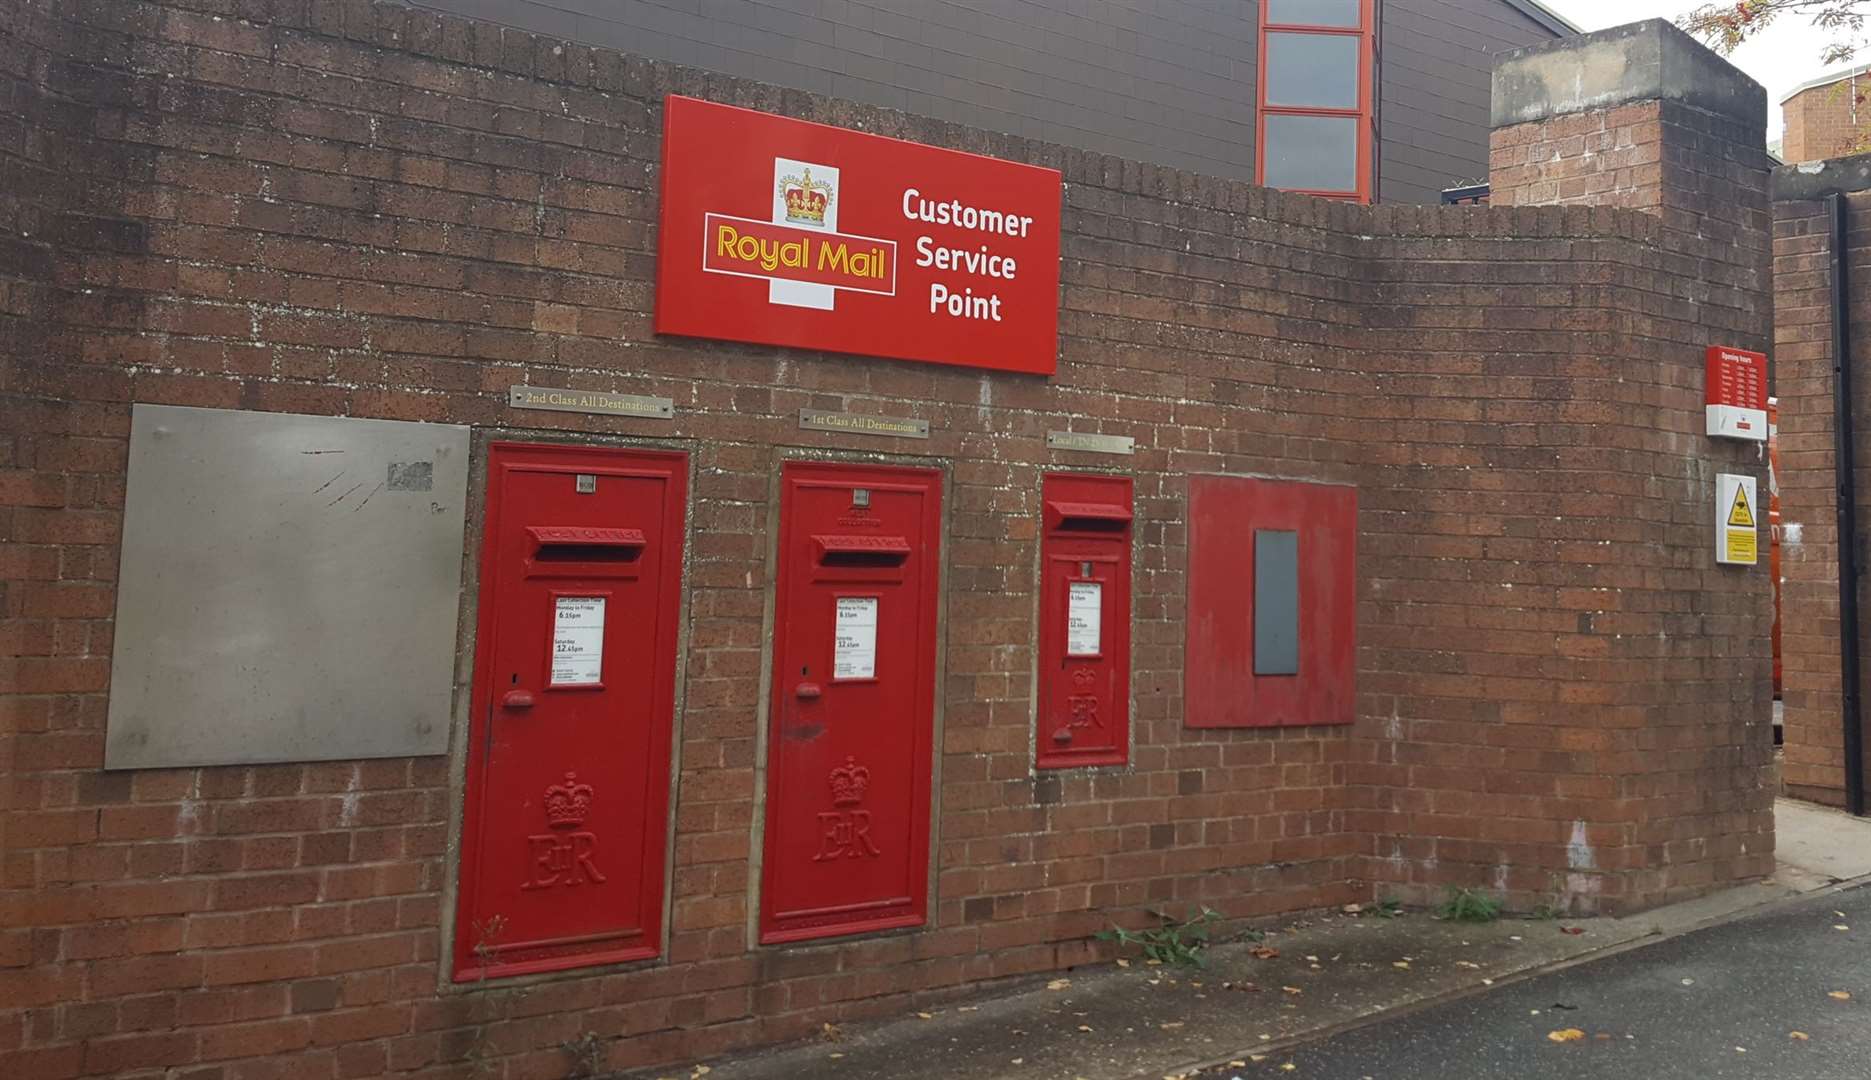 Royal Mail has been forced to alter final Christmas posting dates because of strike action